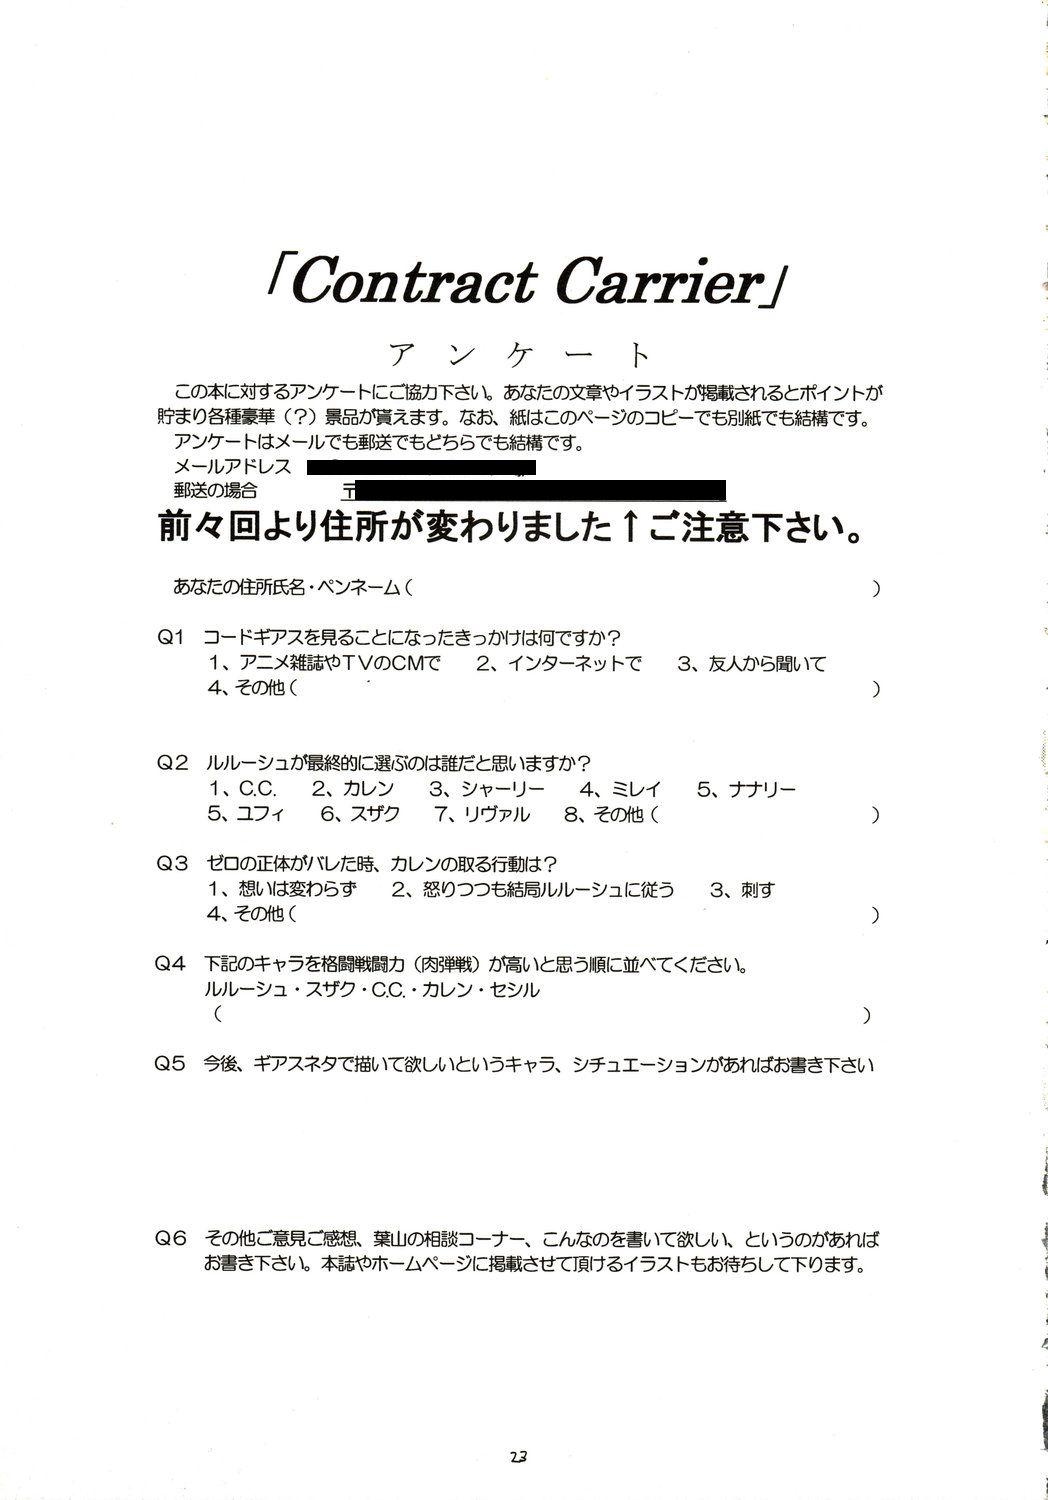 Contract Carrier 21